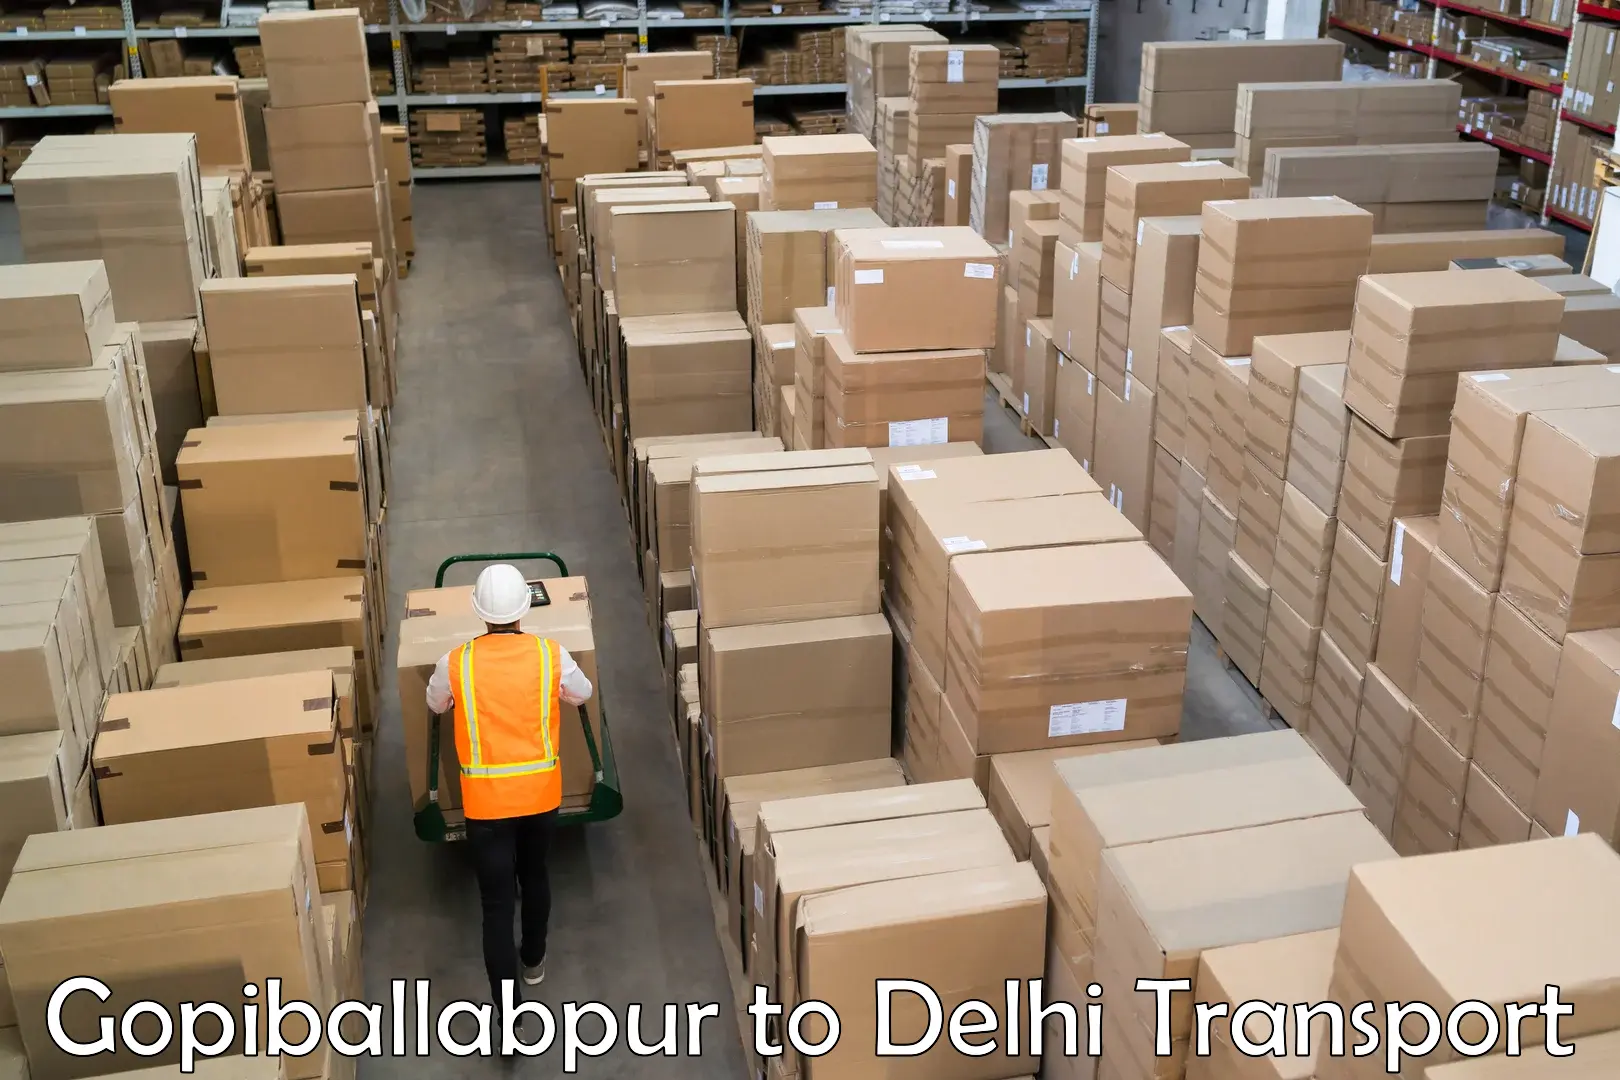 Nationwide transport services Gopiballabpur to NCR